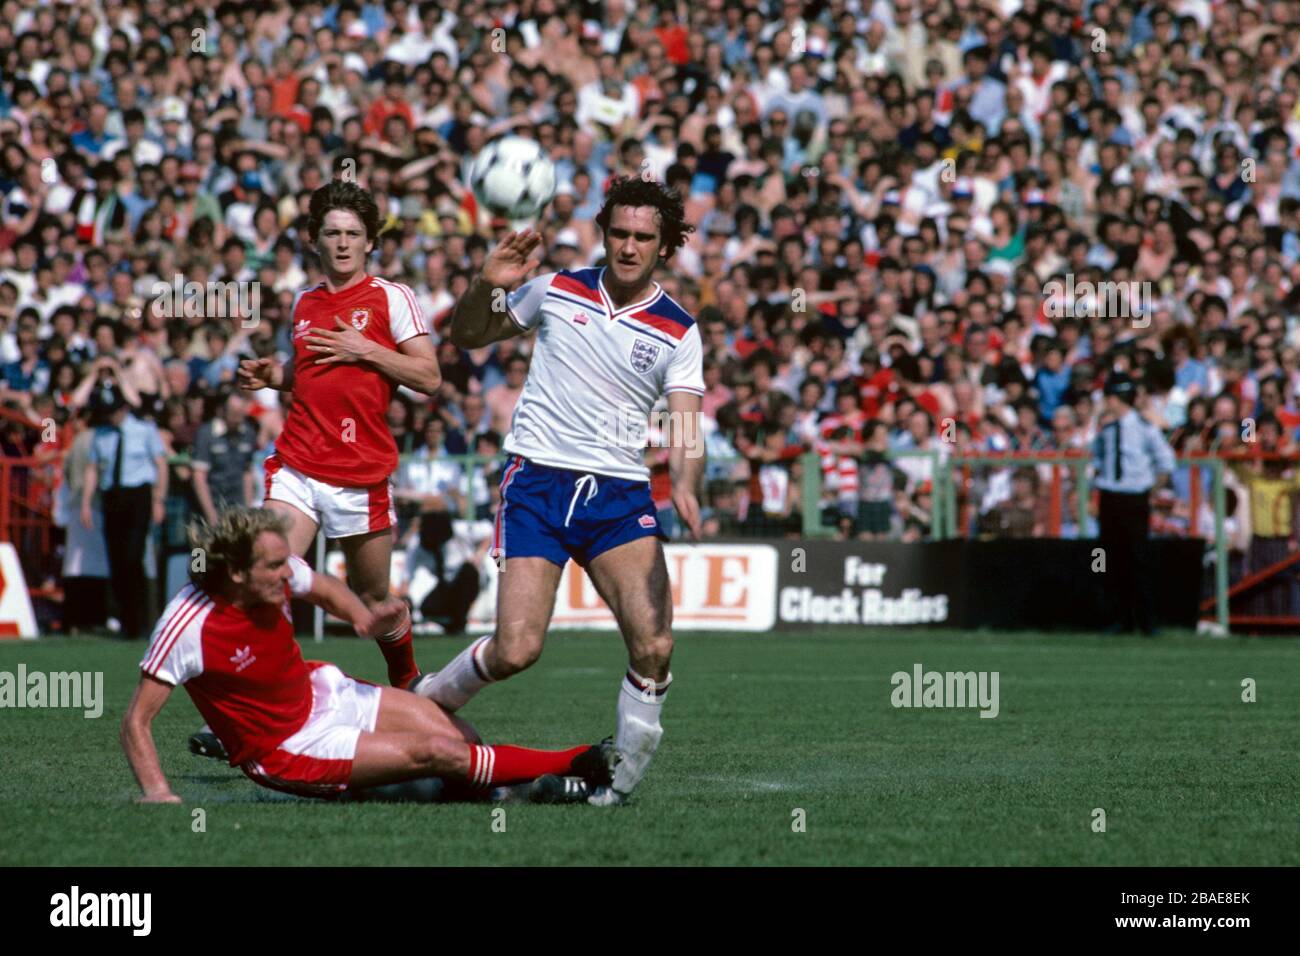 Wales's Terry Yorath (l) crunches England's Larry Lloyd (r) Stock Photo